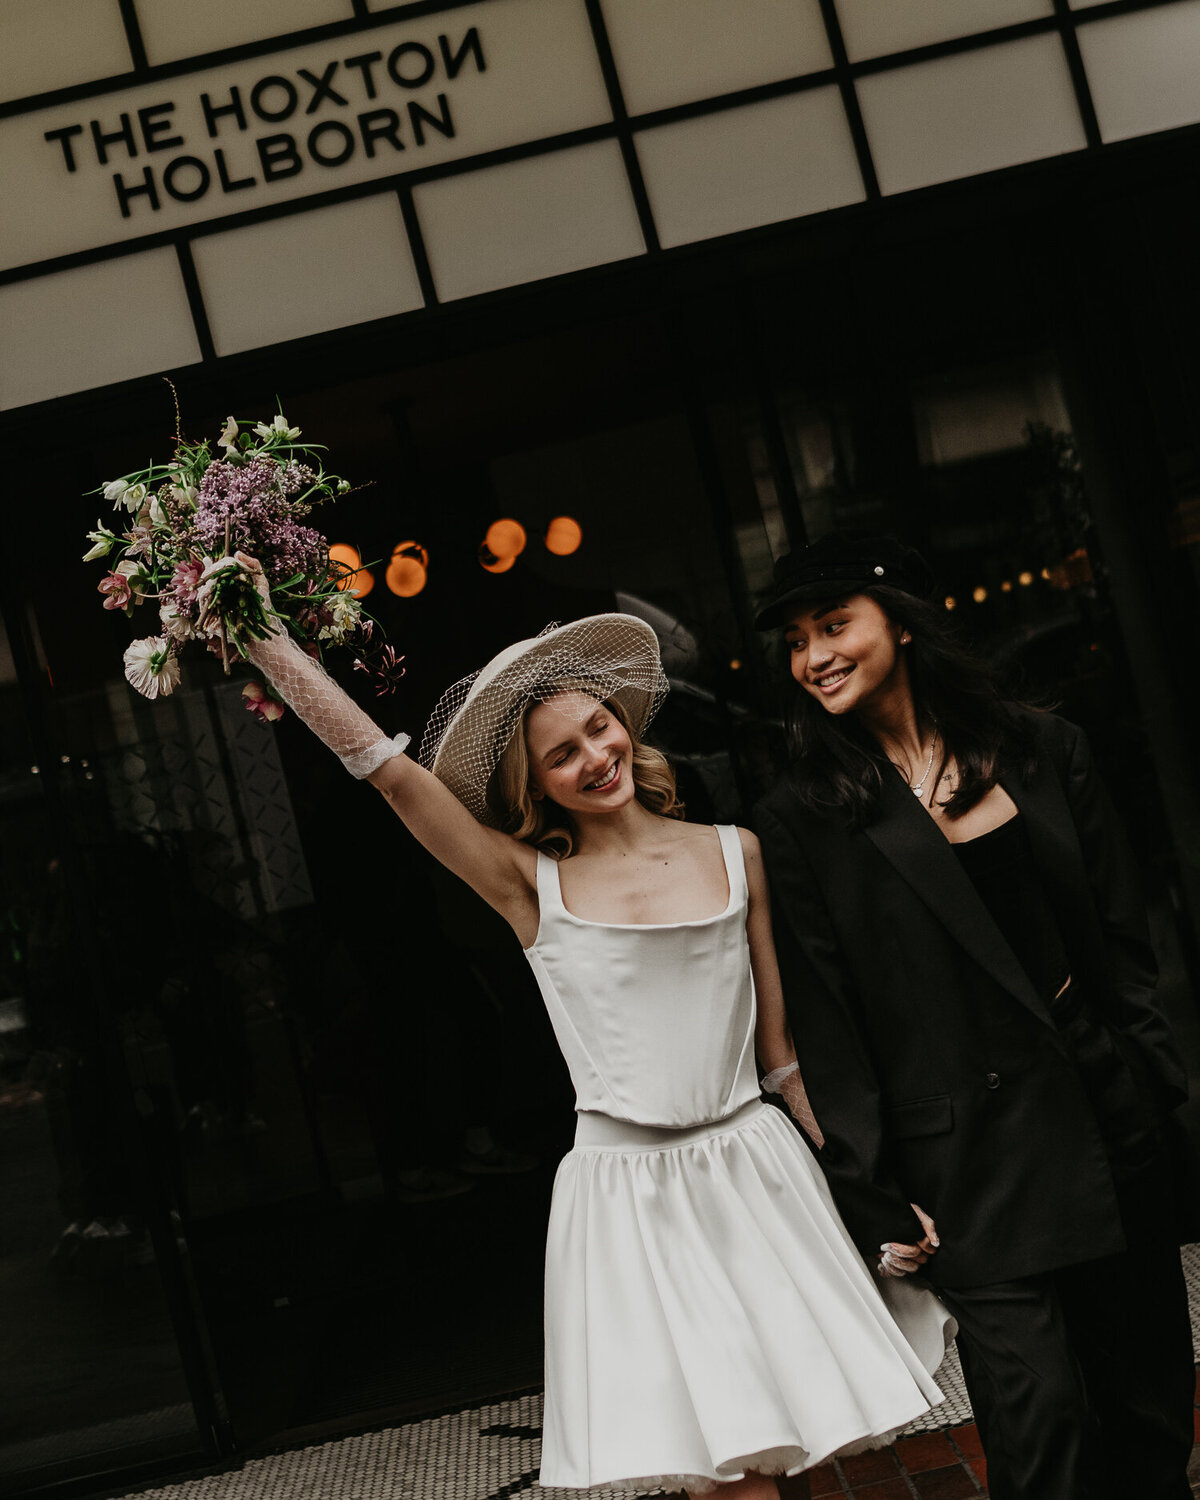 Same sex couple's wedding at The Hoxton in London.